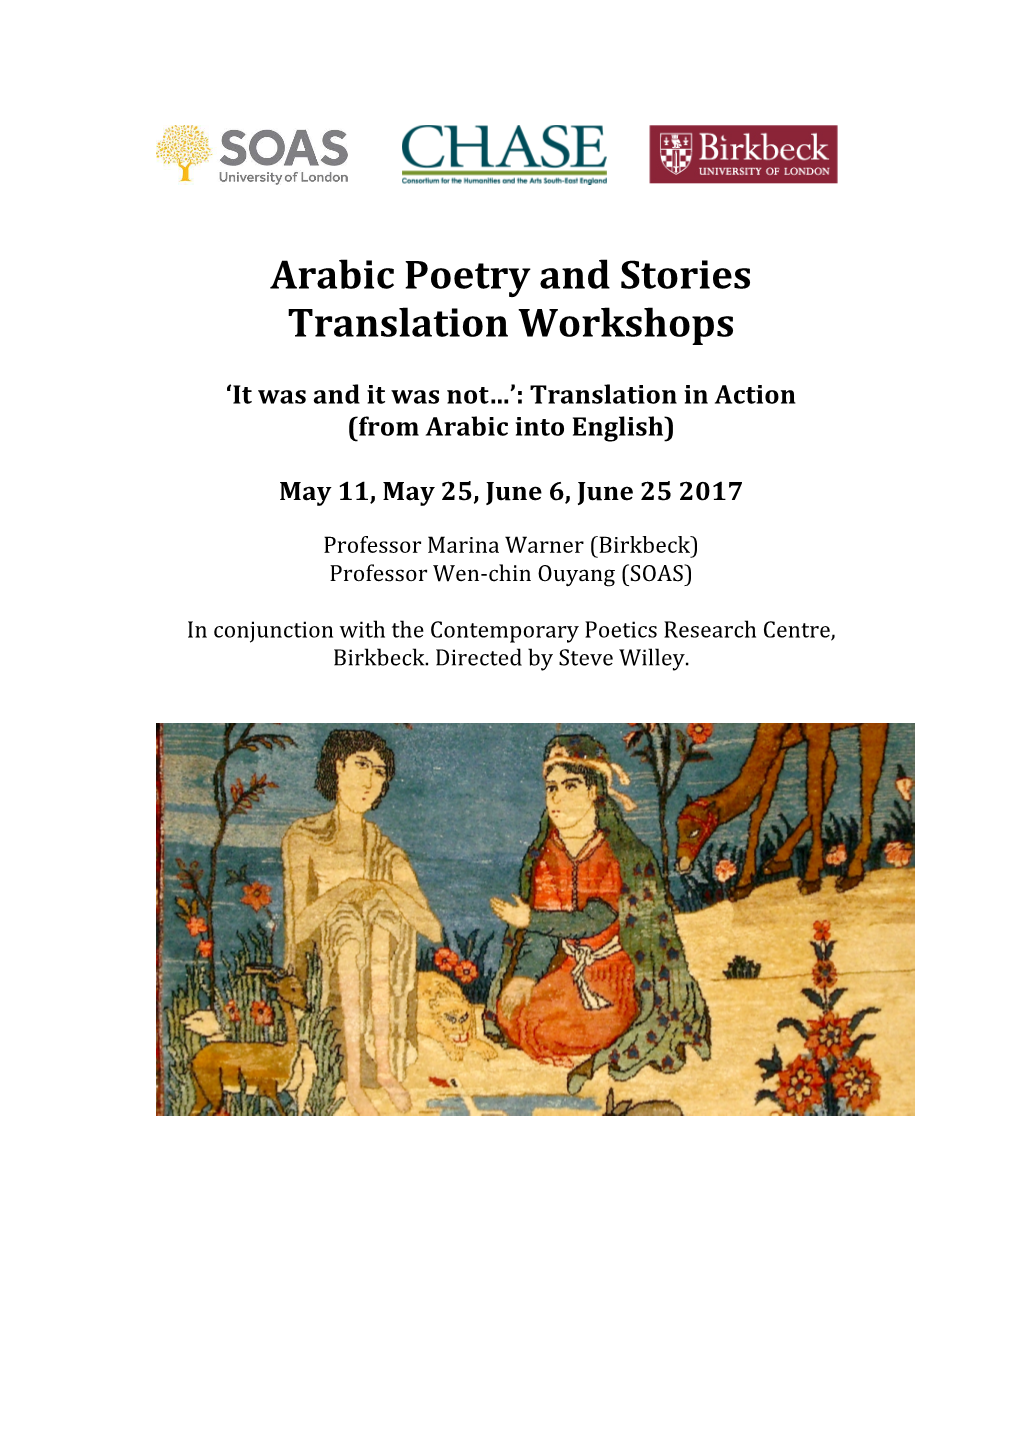 Arabic Poetry and Stories Translation Workshops